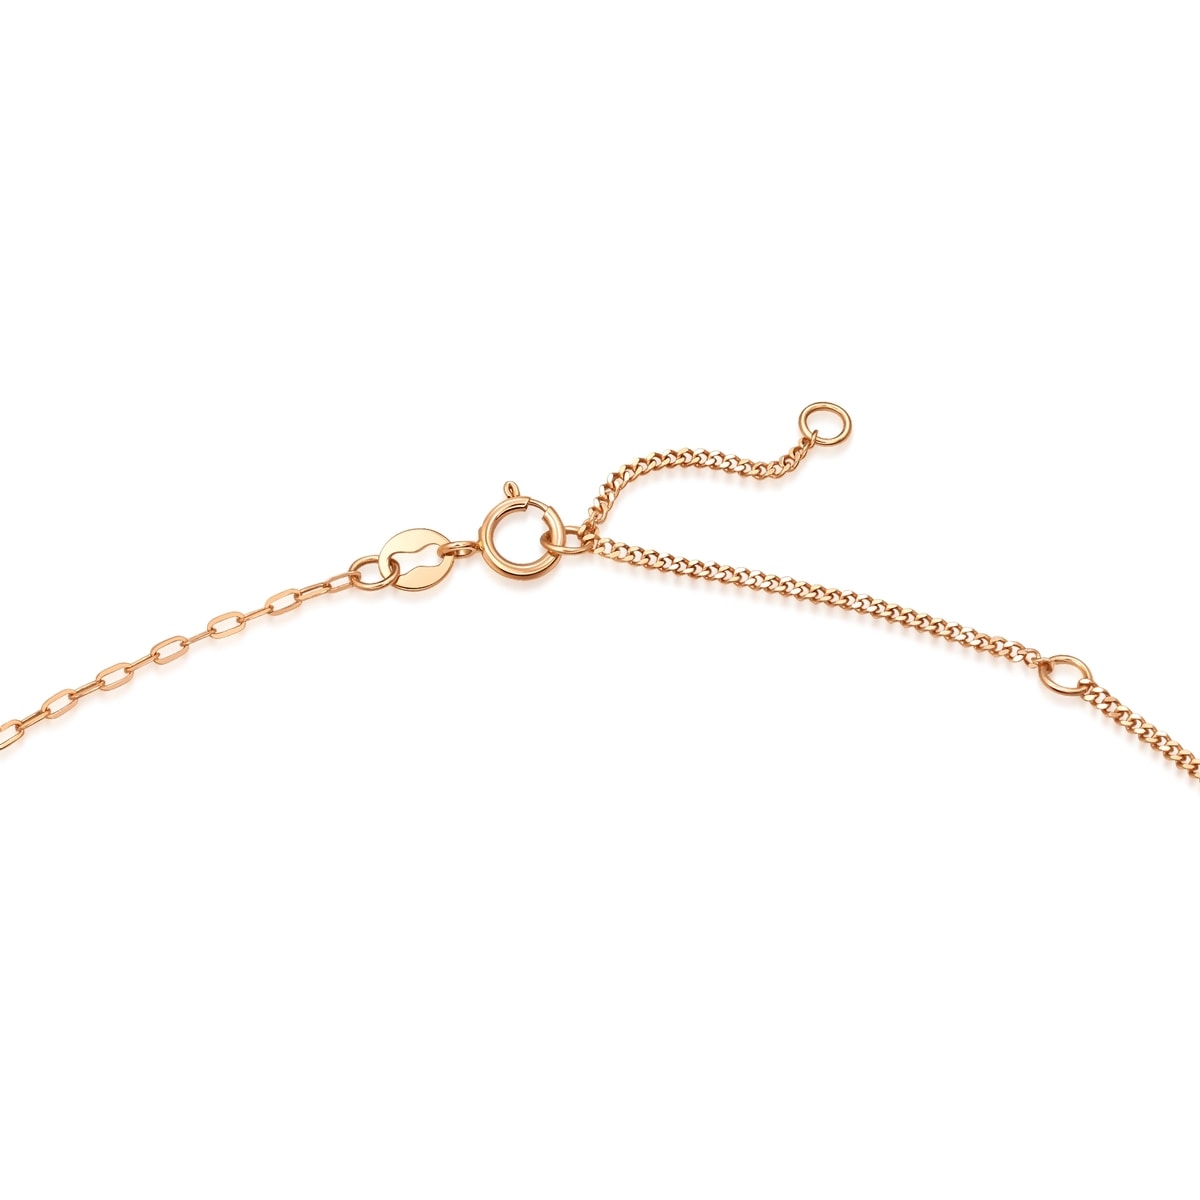 Minty Collection 18K Rose Gold Necklace - 94361N | Chow Sang Sang Jewellery